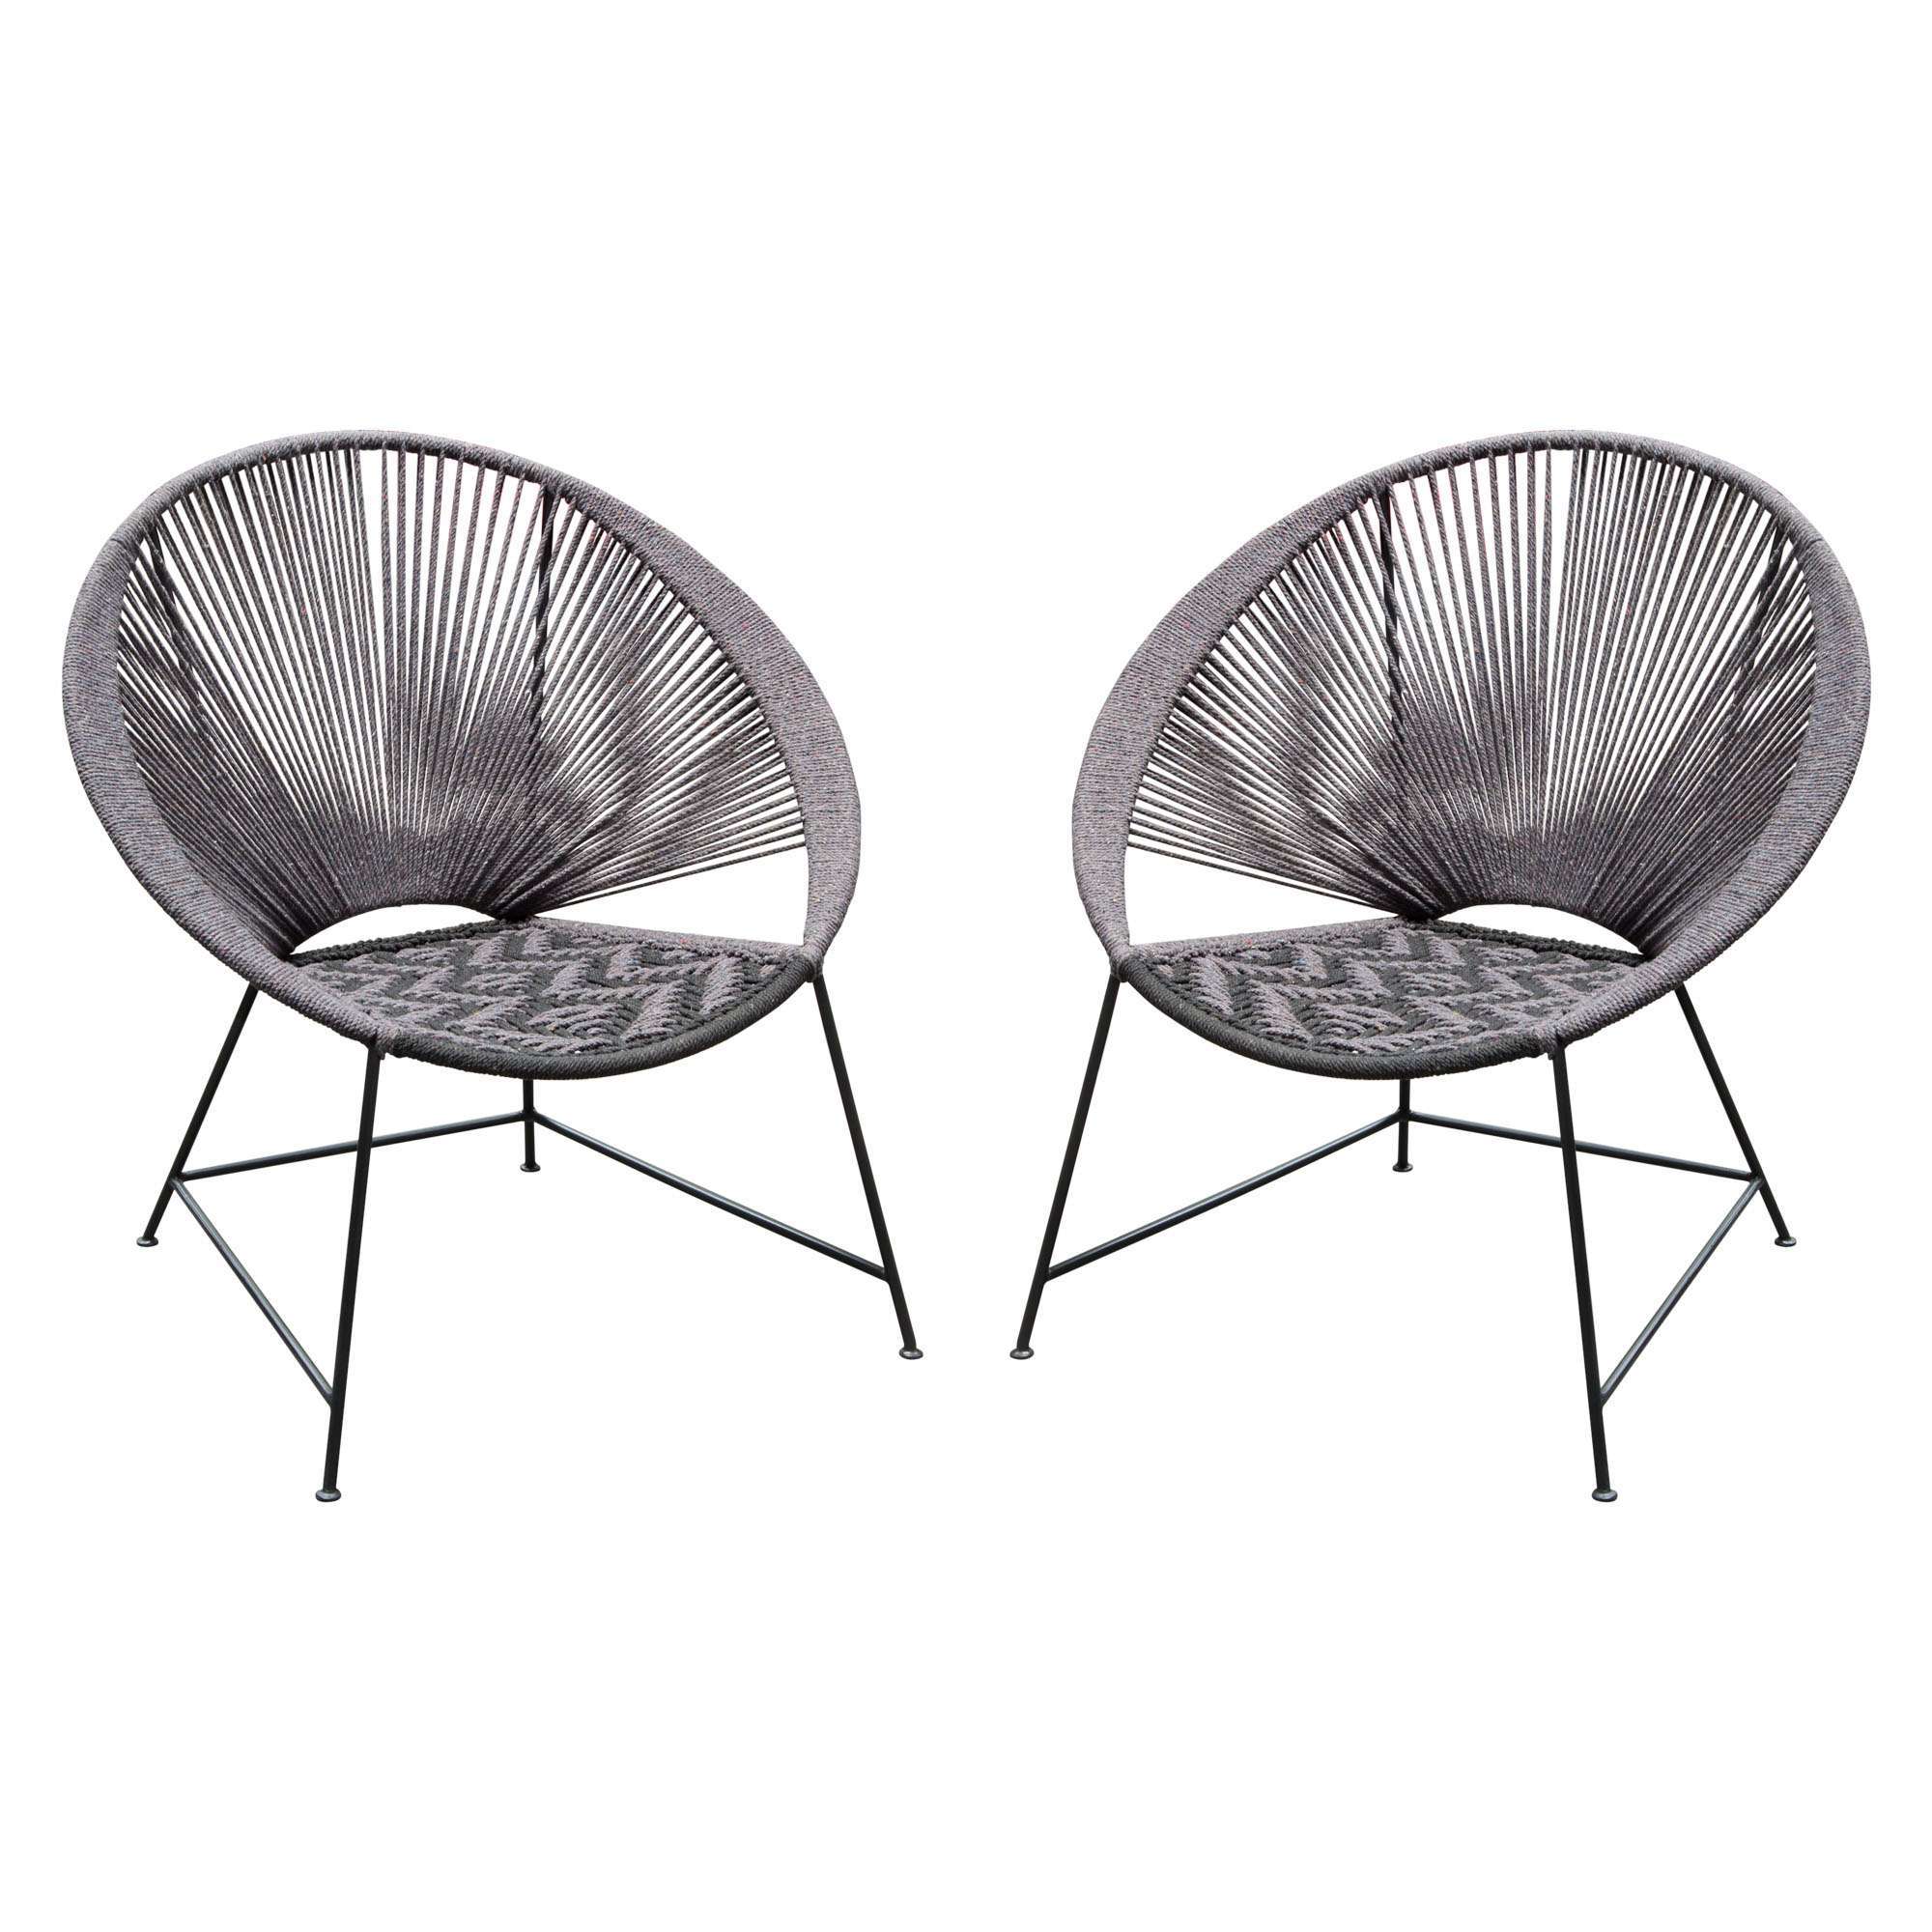 Pablo 2-Pack Accent Chairs in Black/Grey Rope w/ Black Metal Frame by Diamond Sofa - Decorian Group